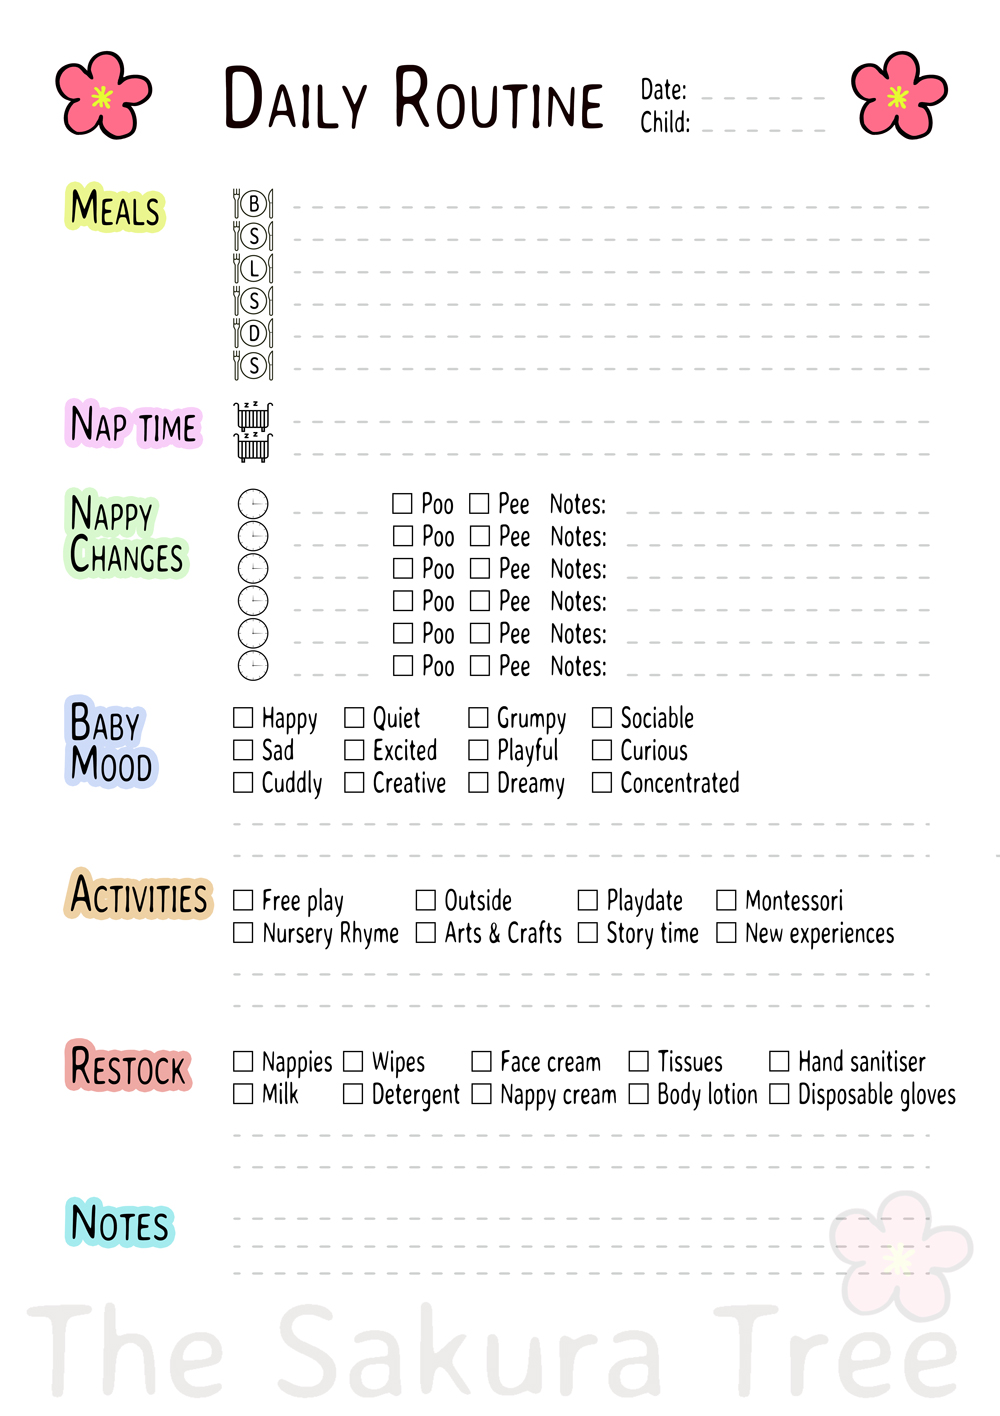 daily schedule printable